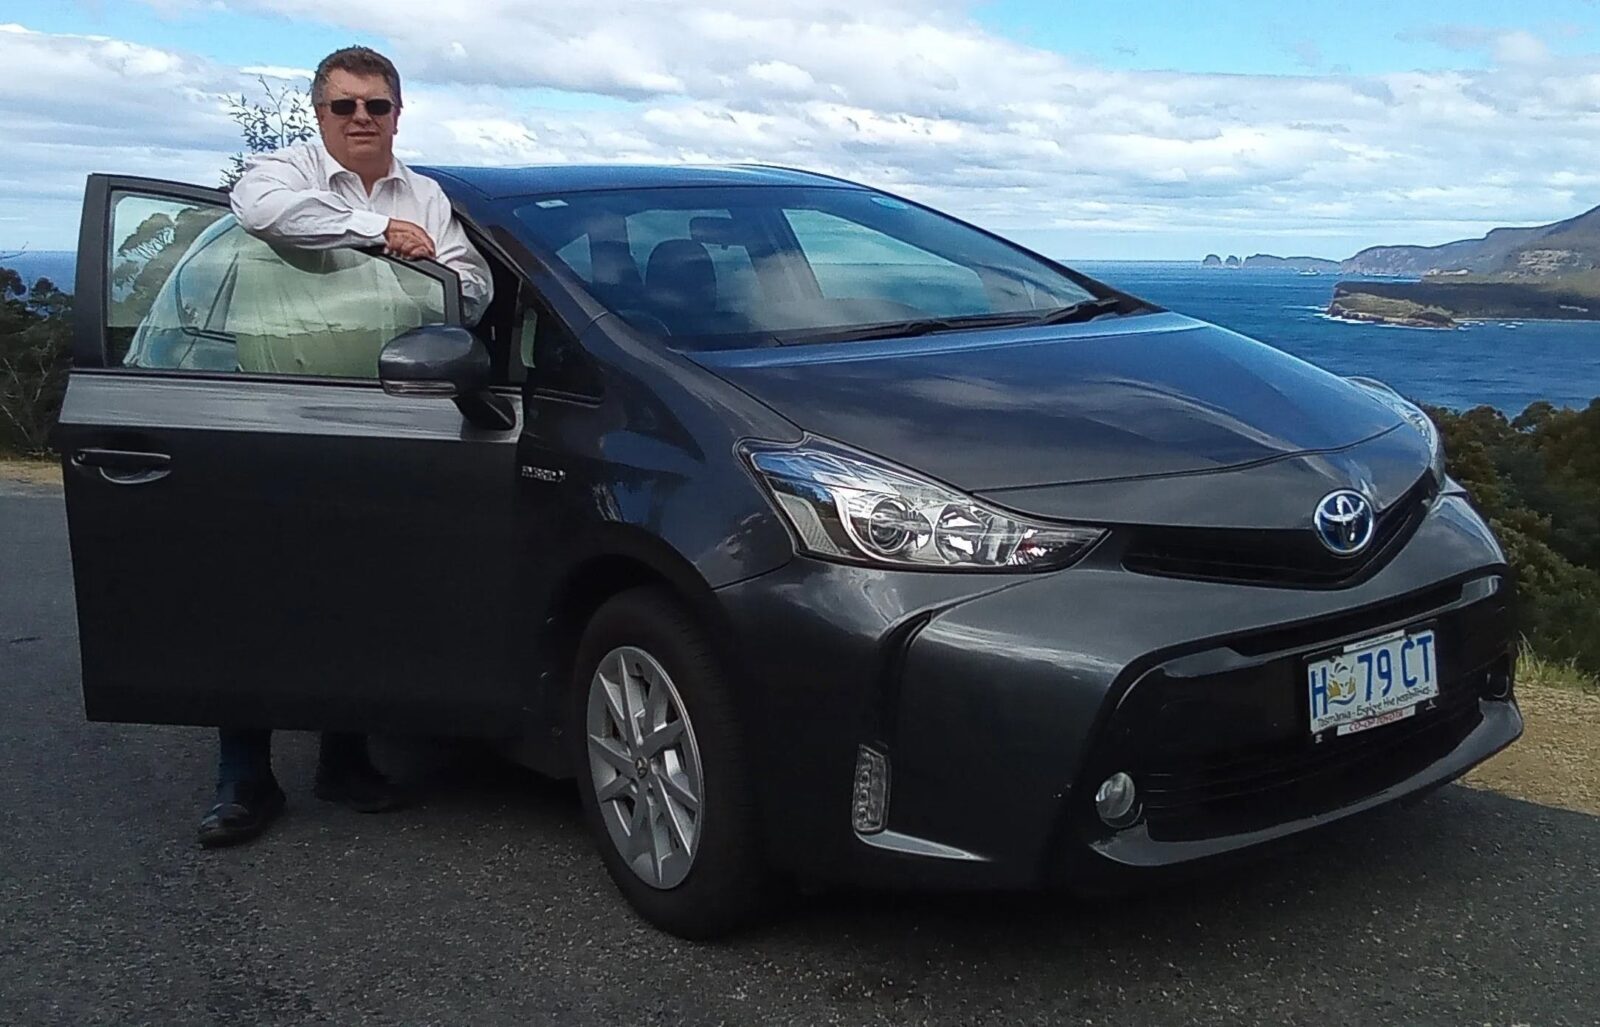 Philip with the car at a lookout on the Tasman Peninsula